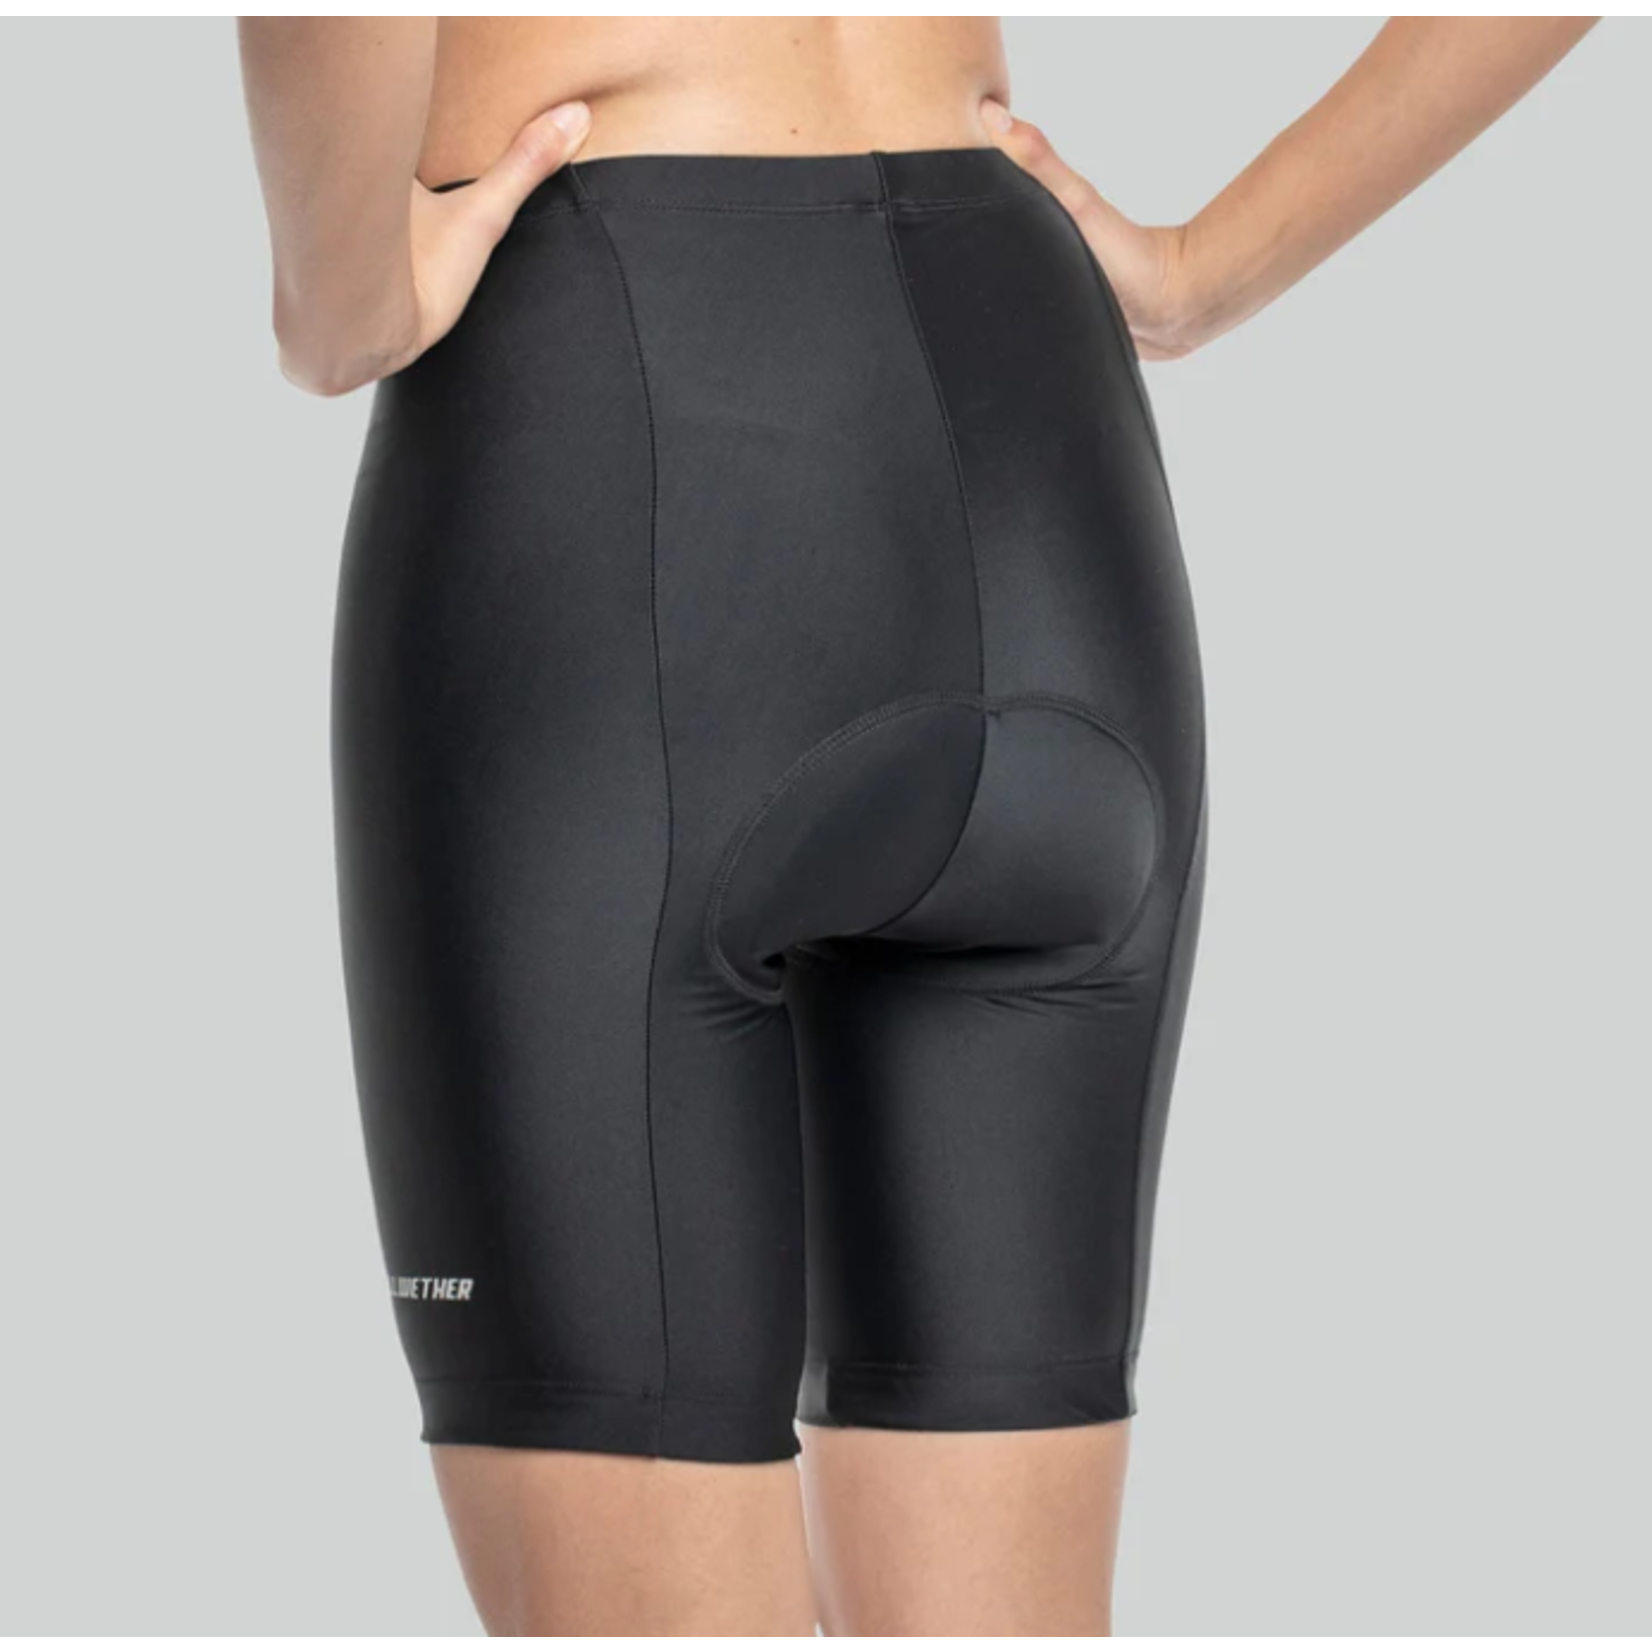 Bellwether Bellwether O2 Cadence Women's Cycling Short Black